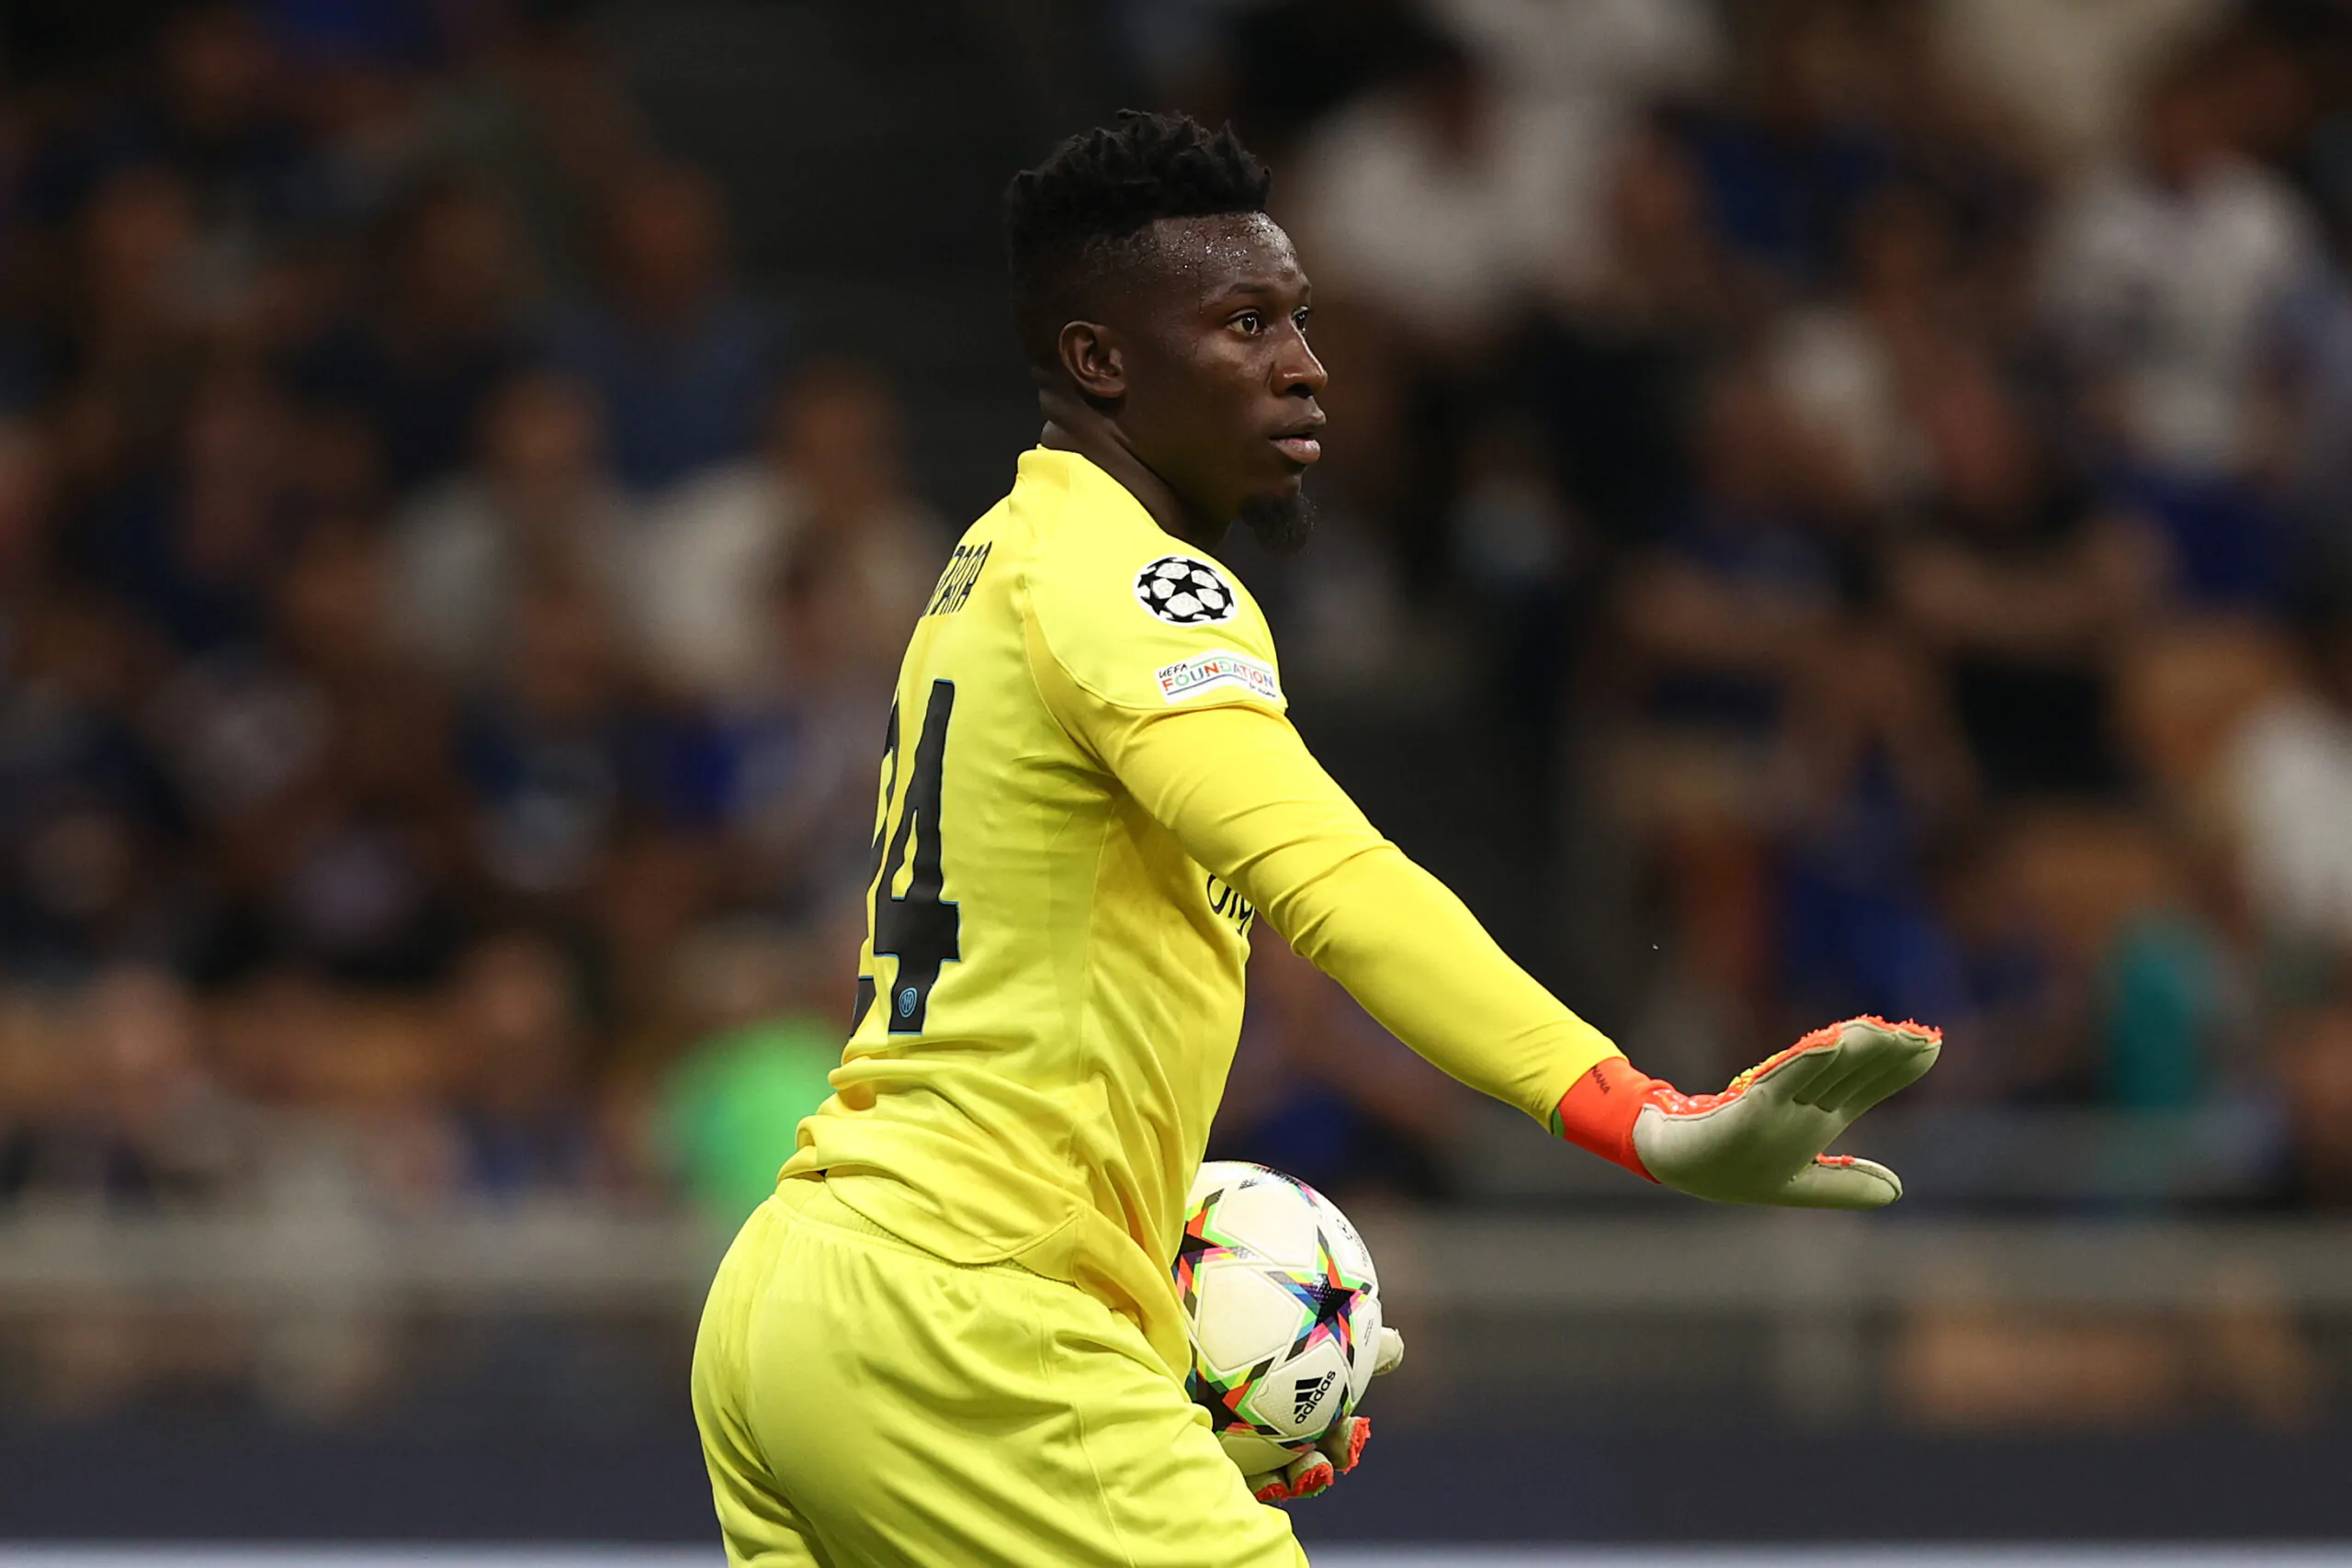 André Onana was one of the few bright spots for Inter in the loss against Bayern Munich, but that wasn’t enough for him to completely supplant Samir Handanovic.